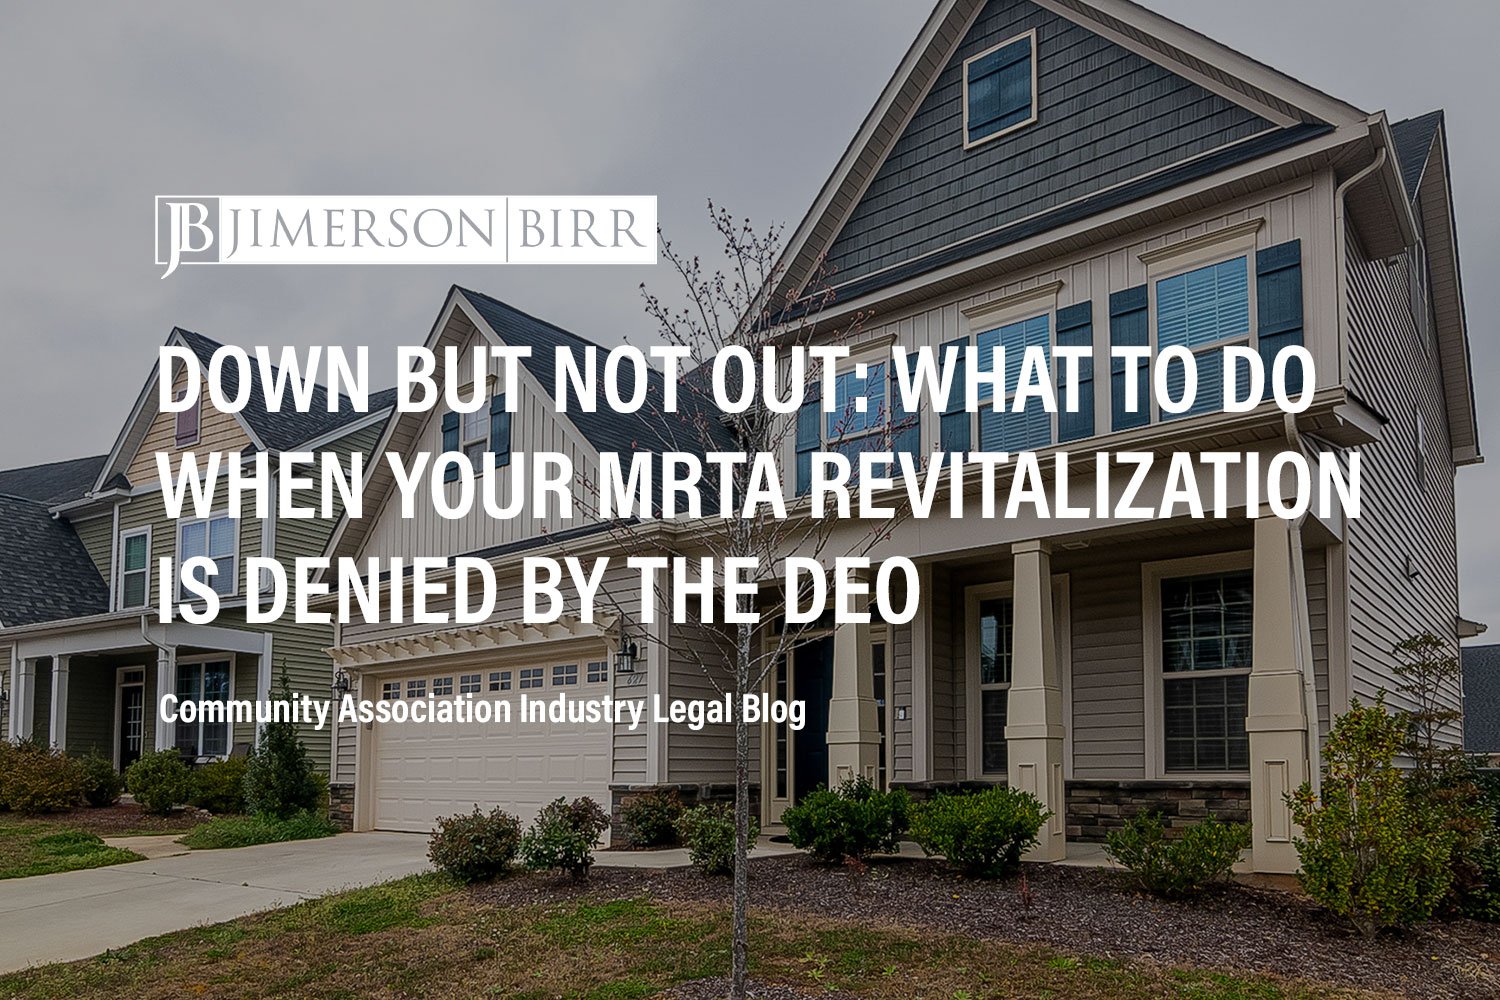 What to Do When Your Community’s MRTA Revitalization is Denied